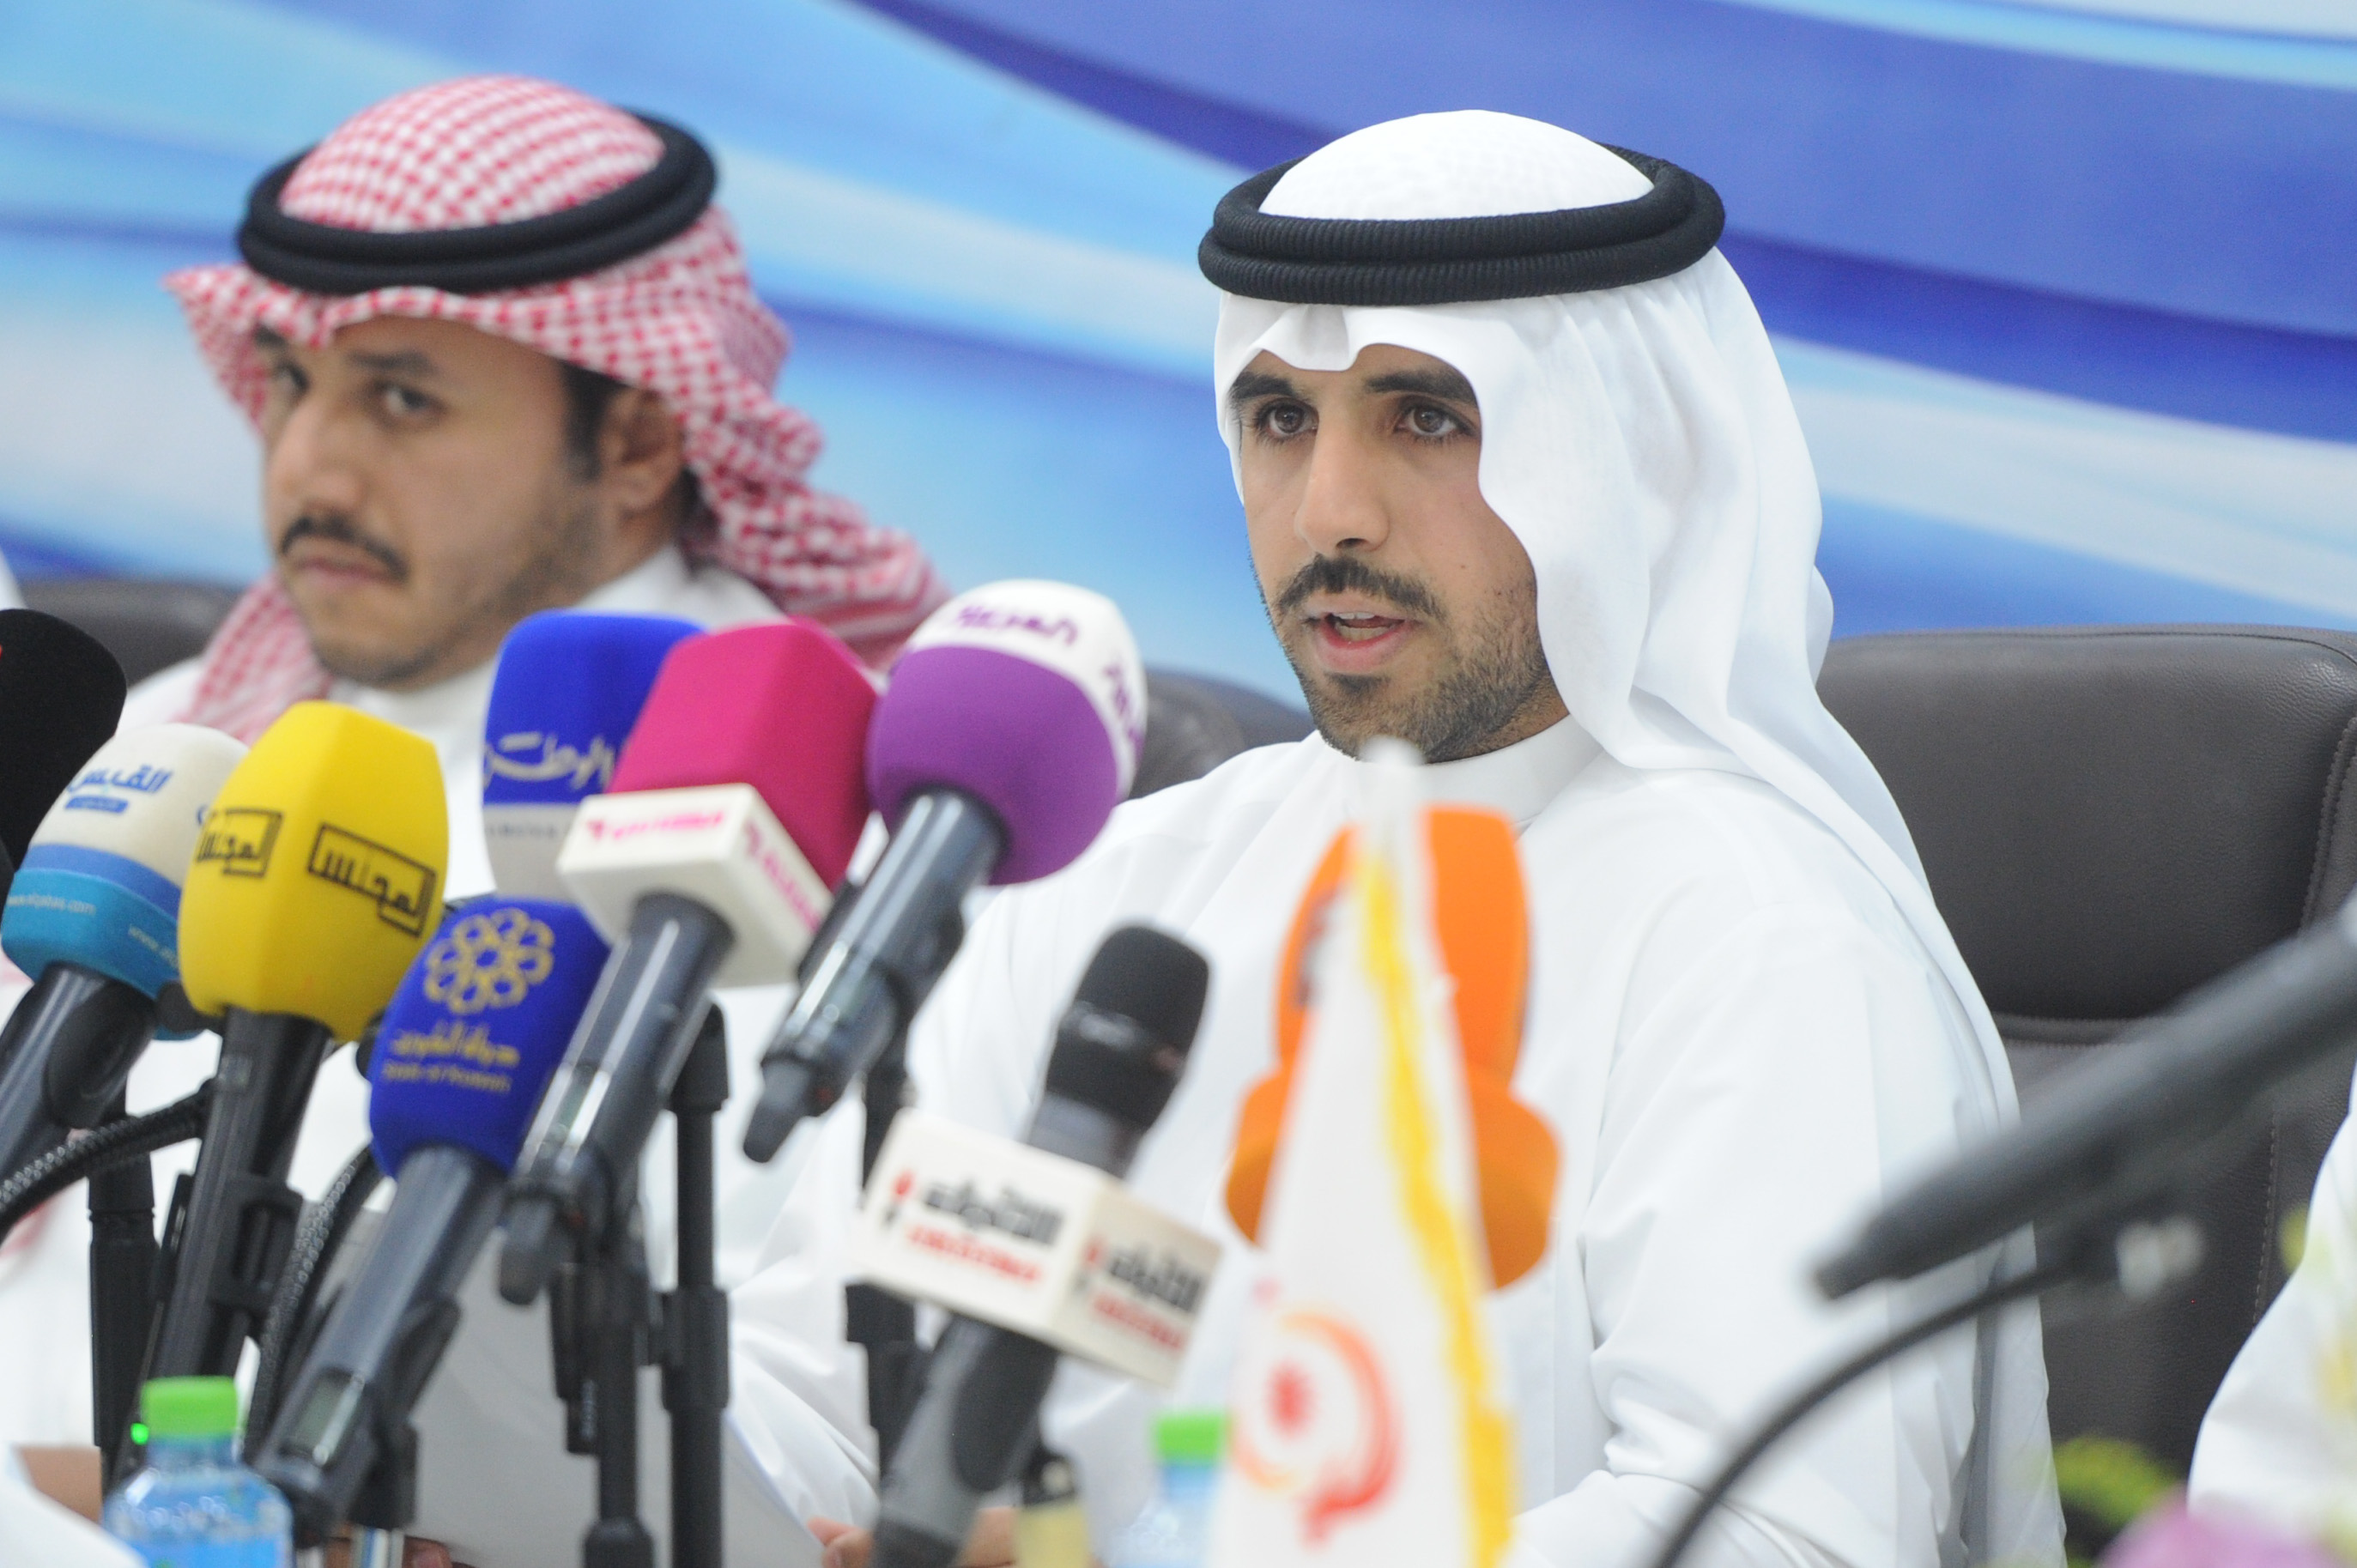 Sheikh Fahad Nasser Al-Sabah was elected as President of the Kuwaiti Olympic Committee